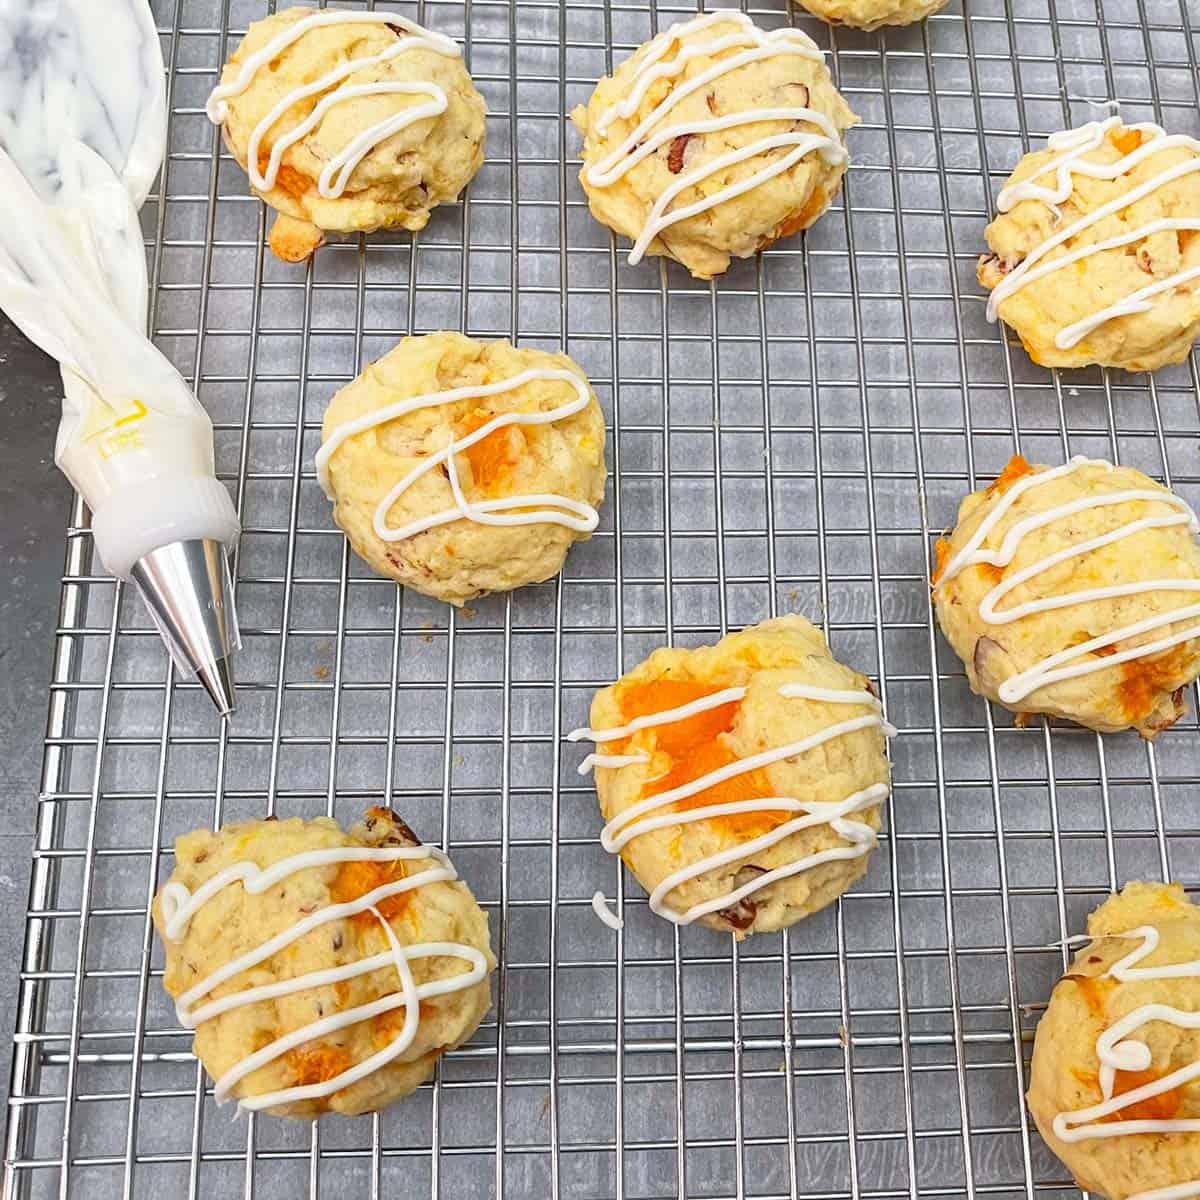 Apricot cookies on cooling rack that have white chocolate drizzled on the tops.